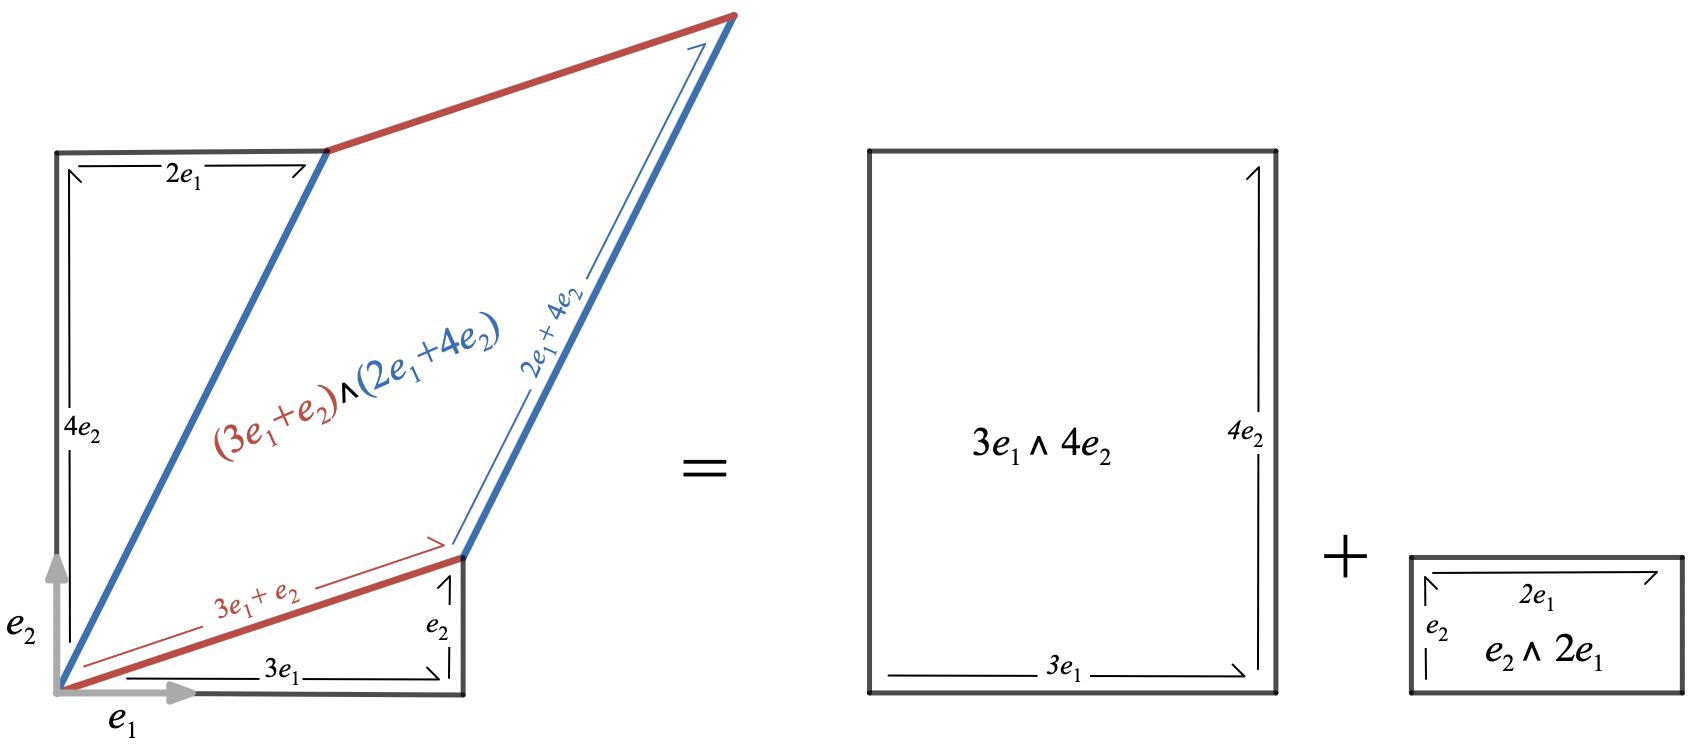 Wedge product in coordinates